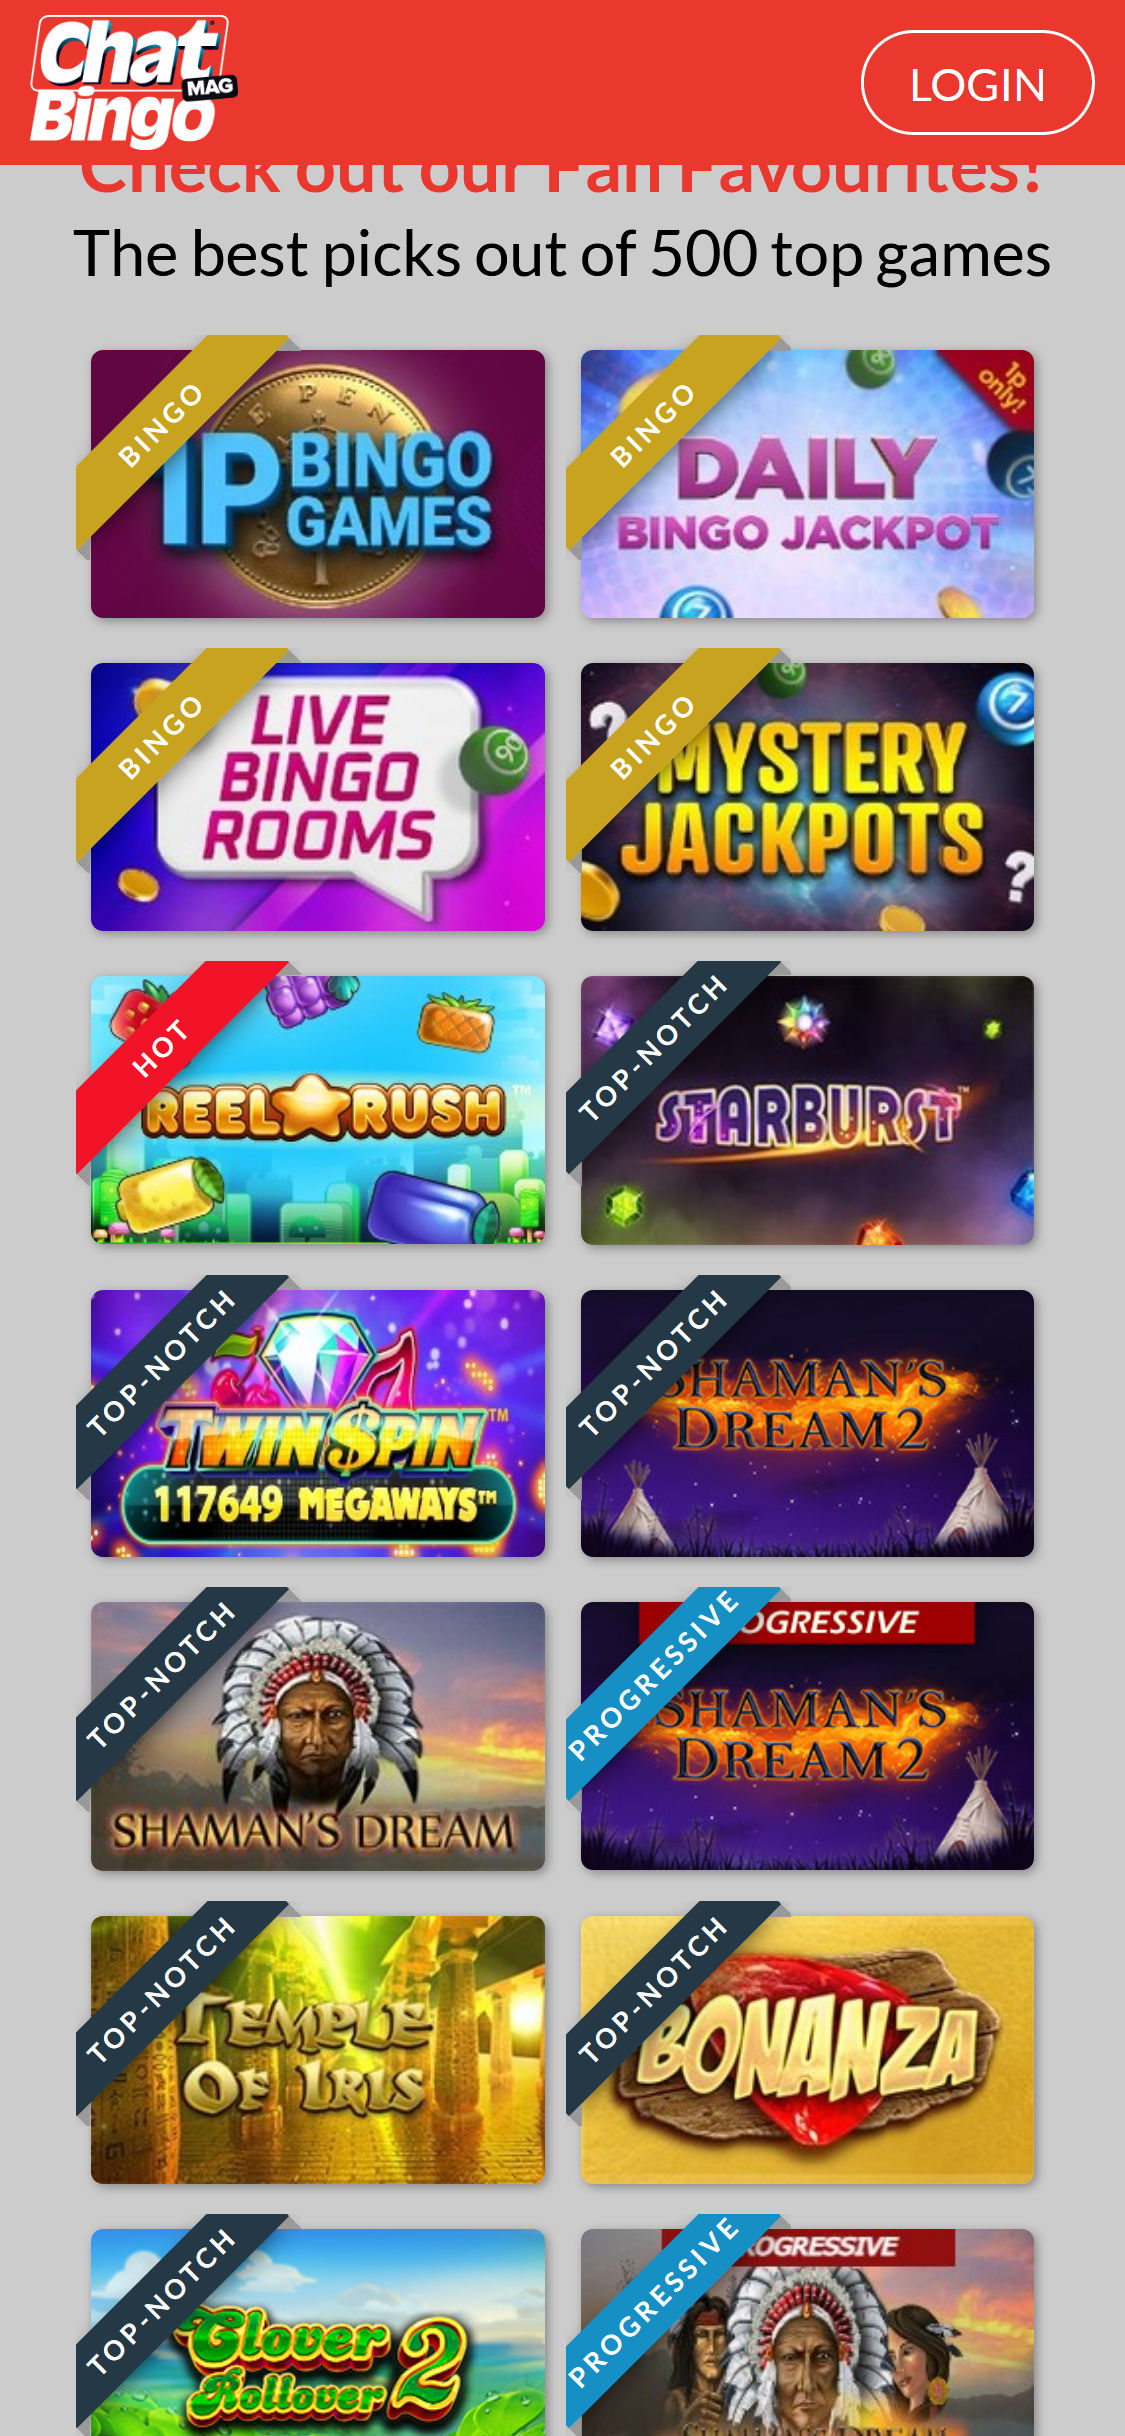 Chat Magbingo Casino Mobile Games Review